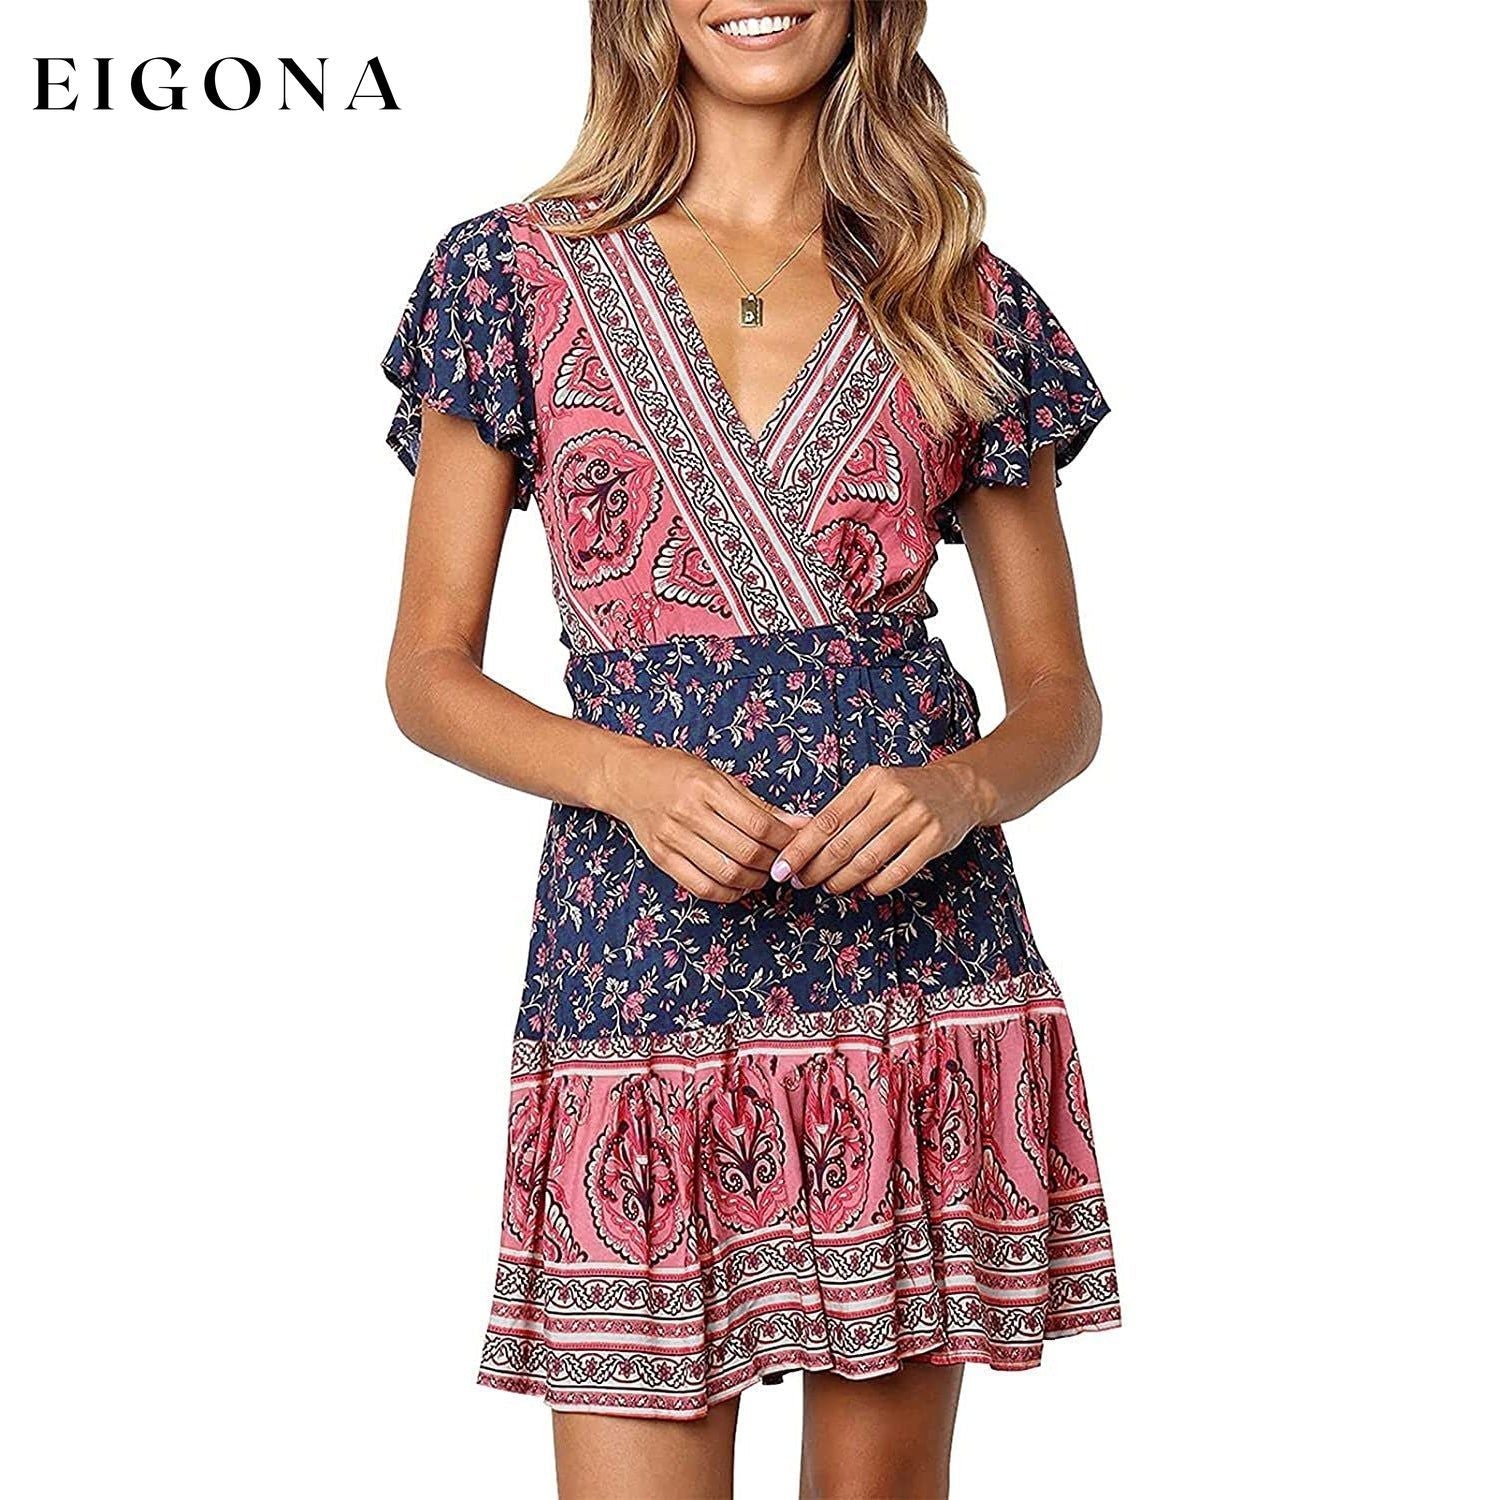 Women’s Summer Wrap V Neck Bohemian Floral Print Mini Dress Navy Red __stock:200 casual dresses clothes dresses refund_fee:1200